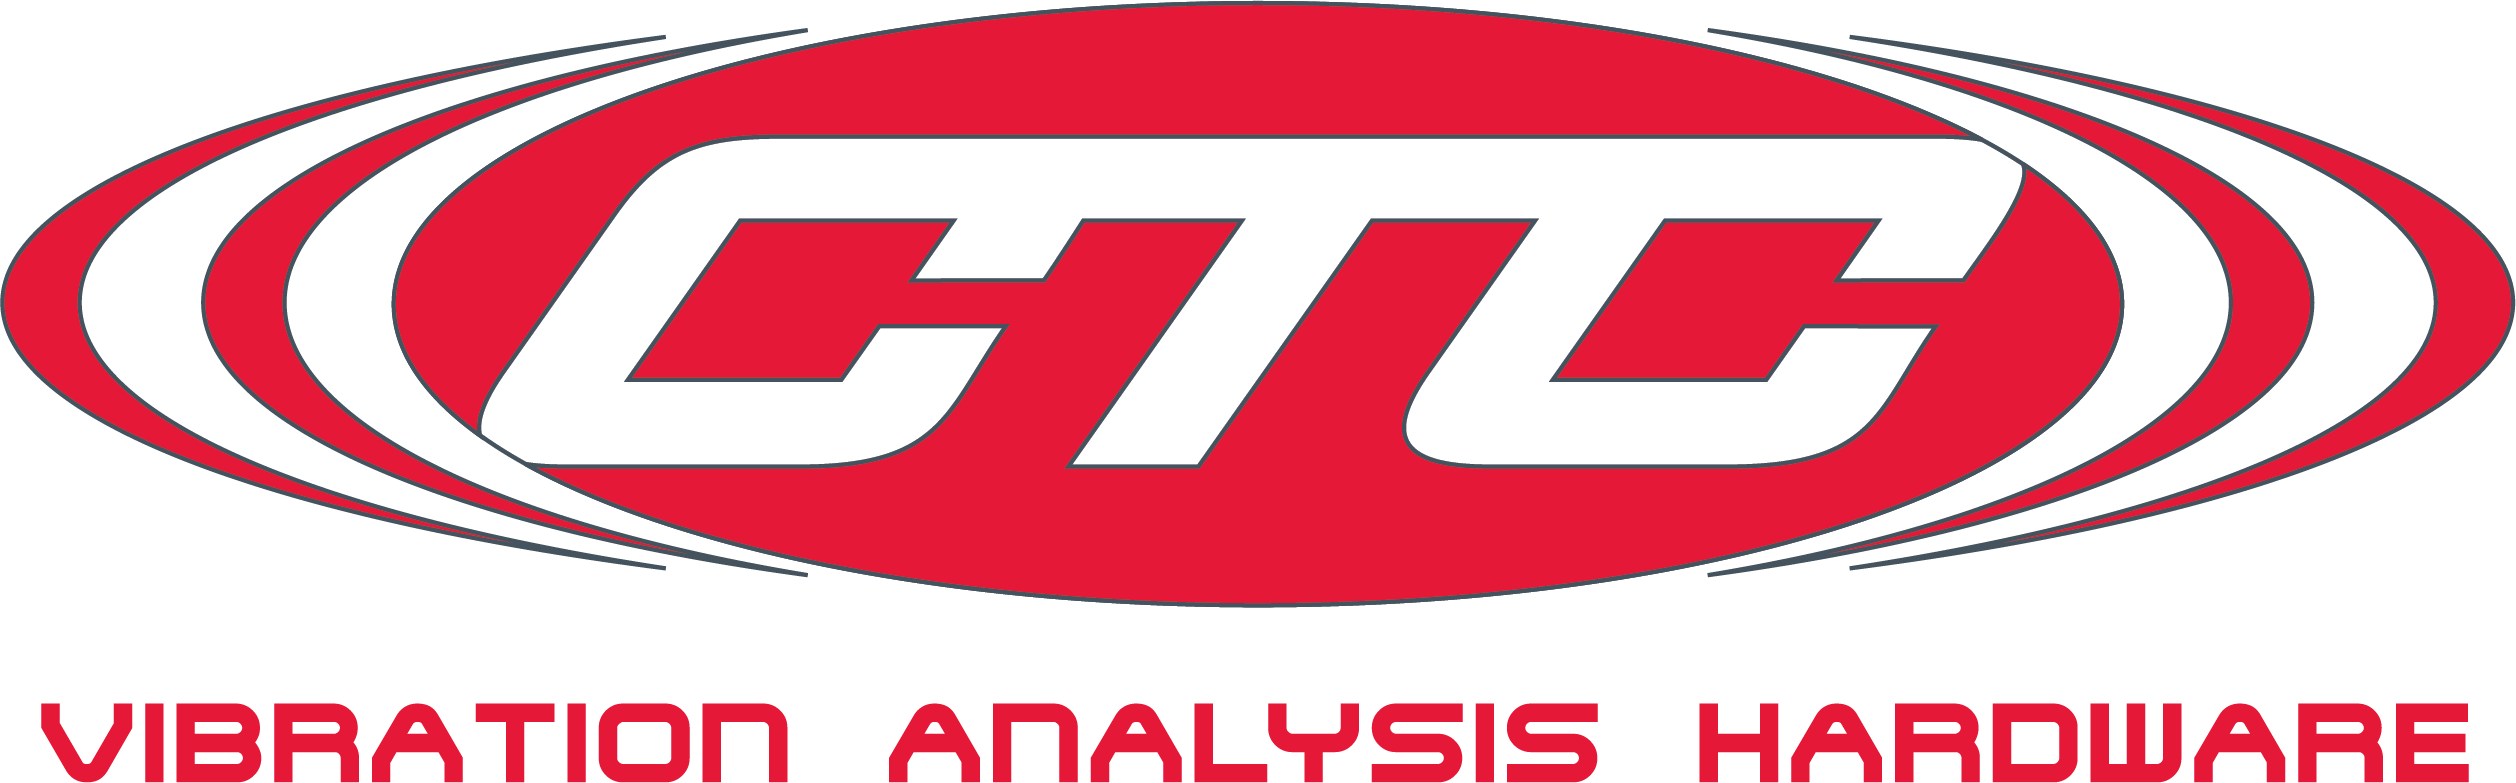 Red CTC Line Logo with Vibration Analysis Hardware tagline underneath